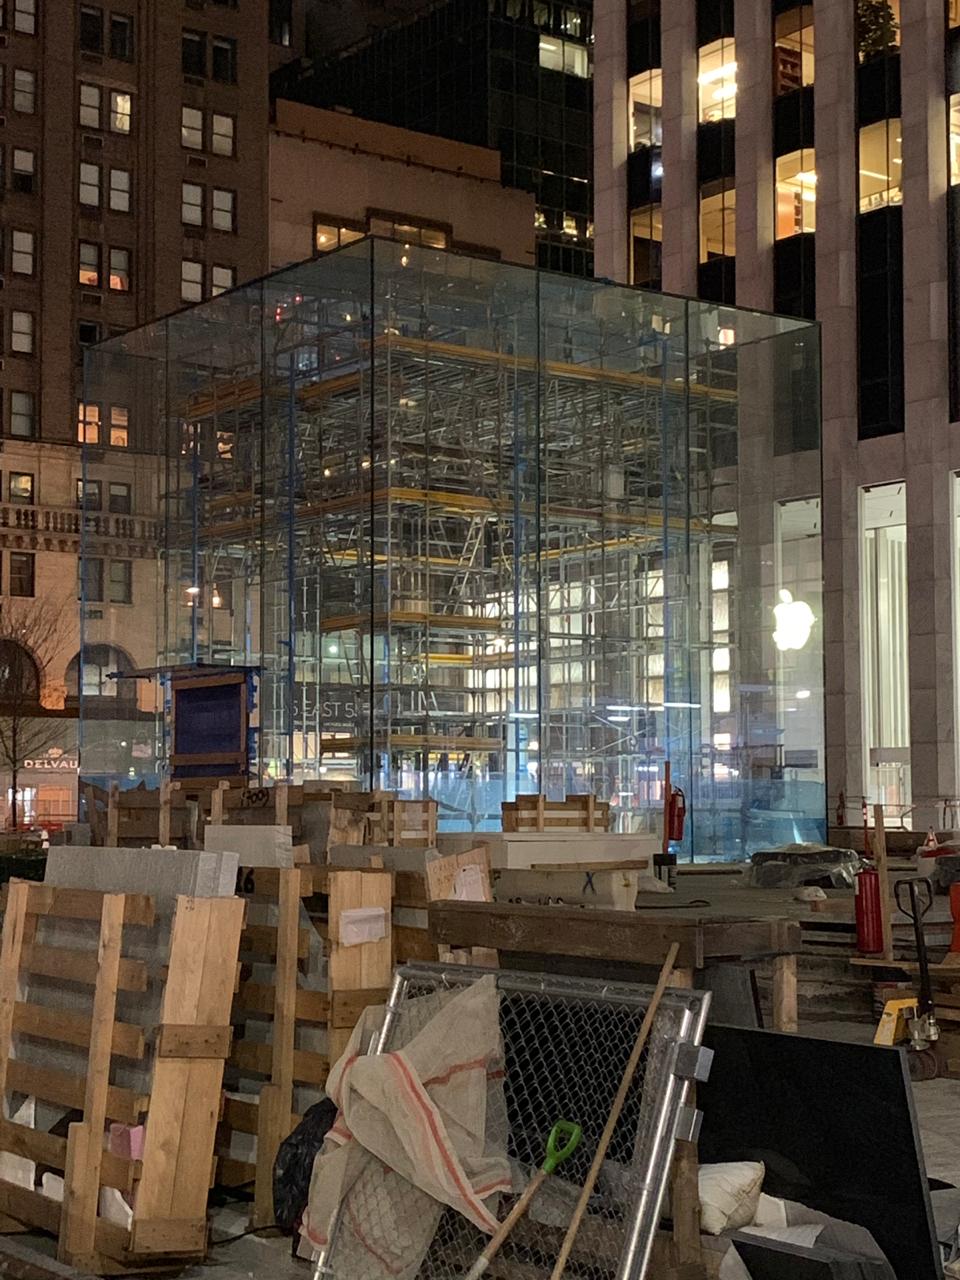 Apple works Fifth Avenue, in New York, should finish this semester